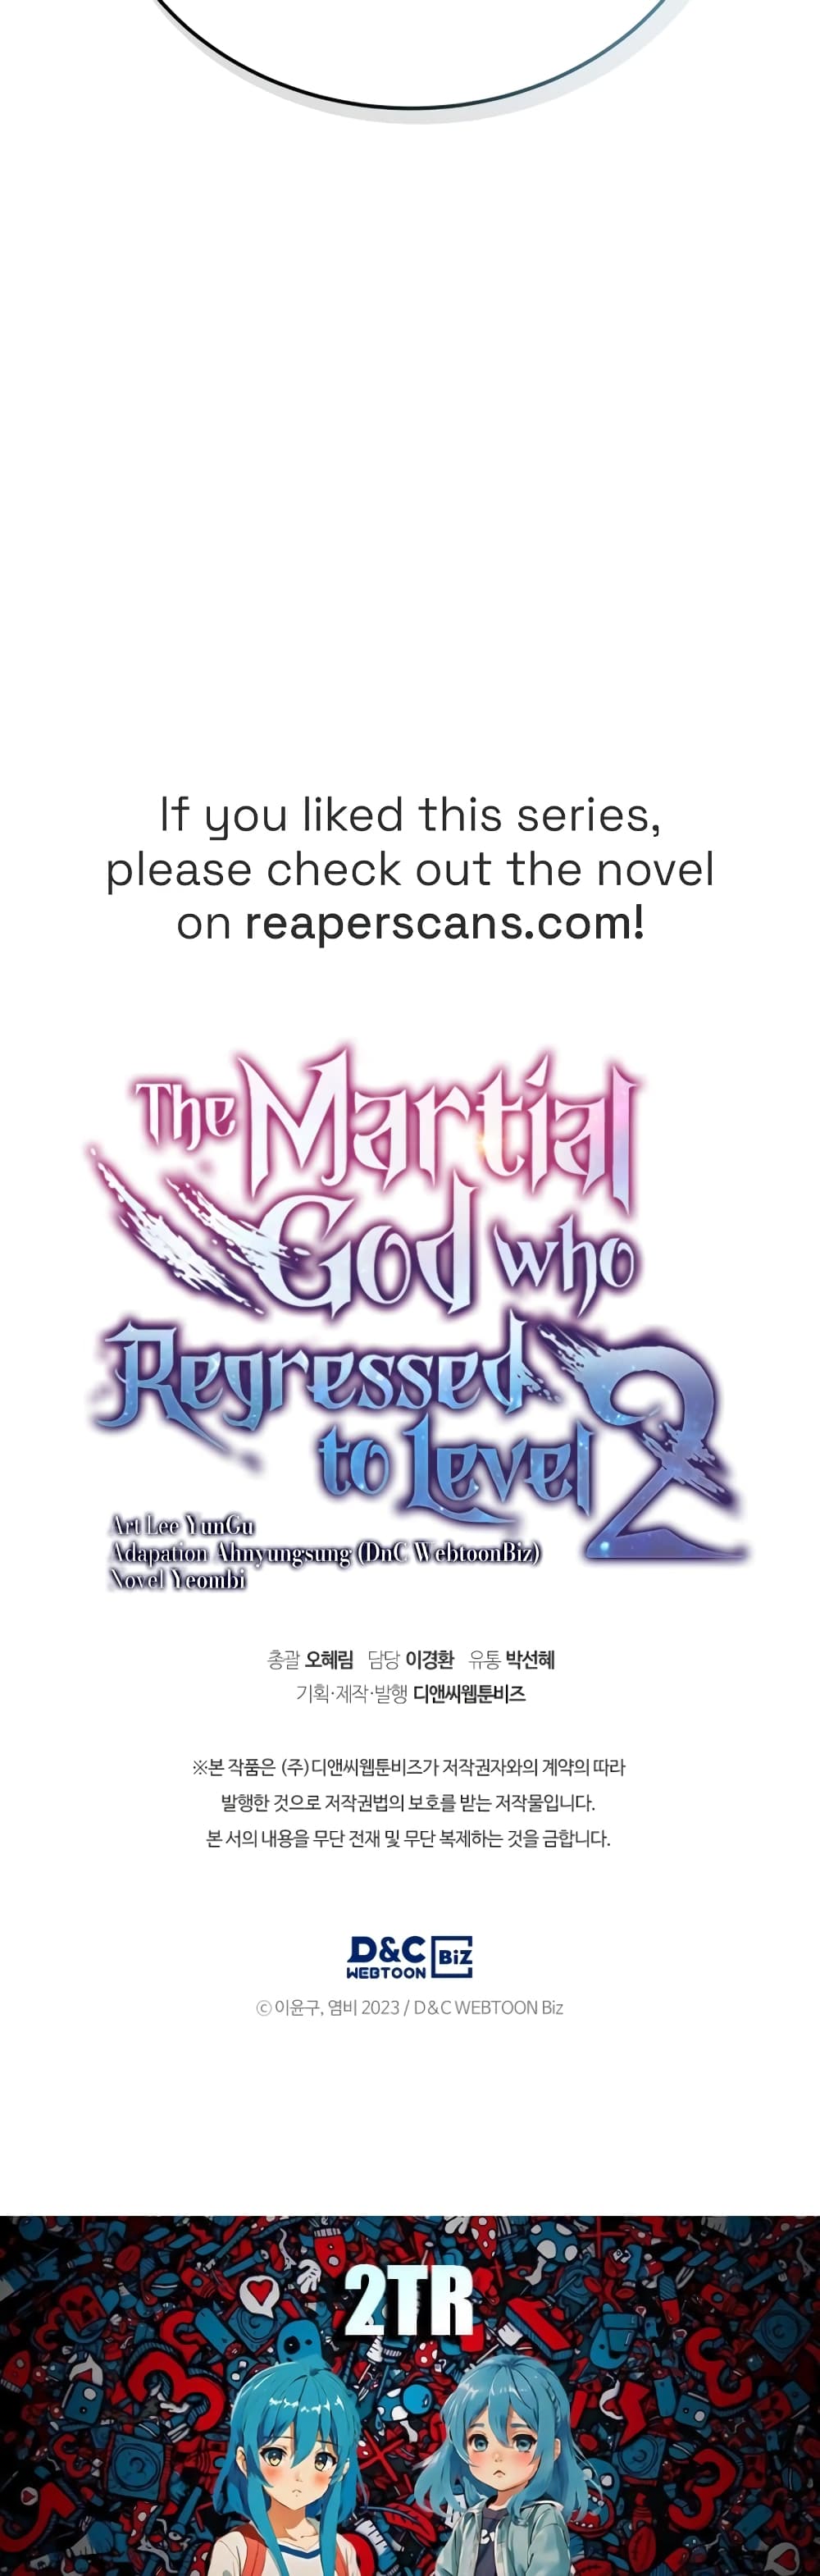 Martial God Regressed to Level 2 4-4